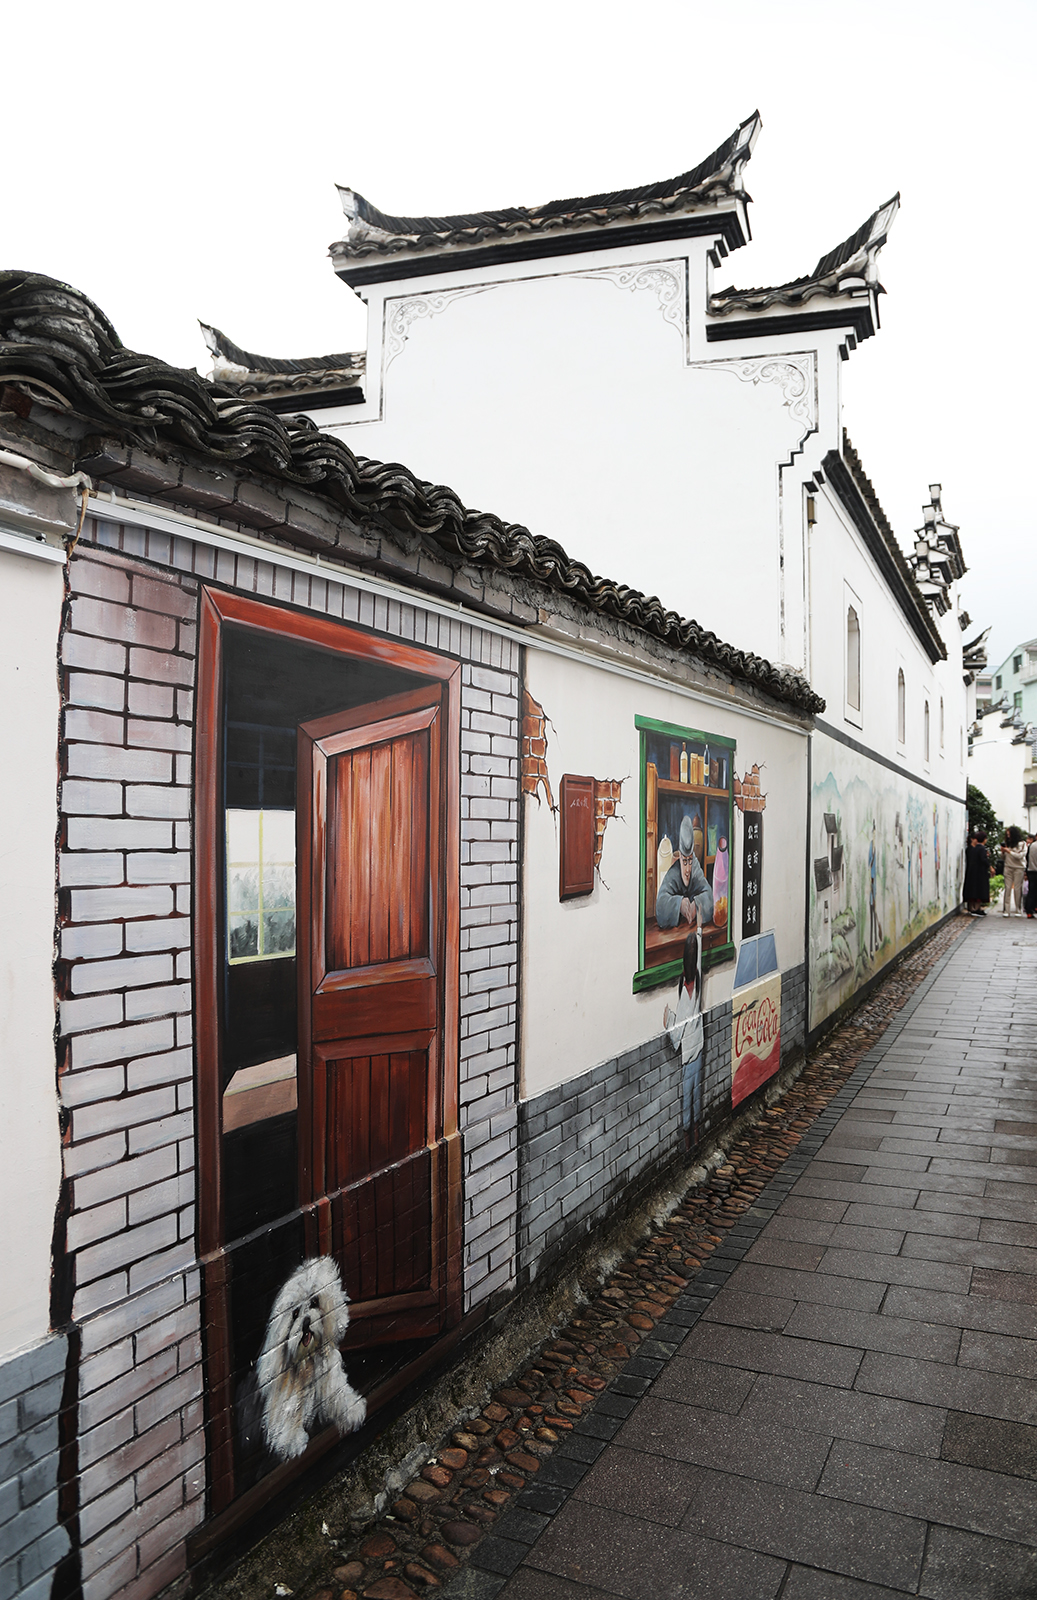 Well-preserved traditional houses are seen in Lizu Village in Yiwu, Zhejiang Province. /CGTN